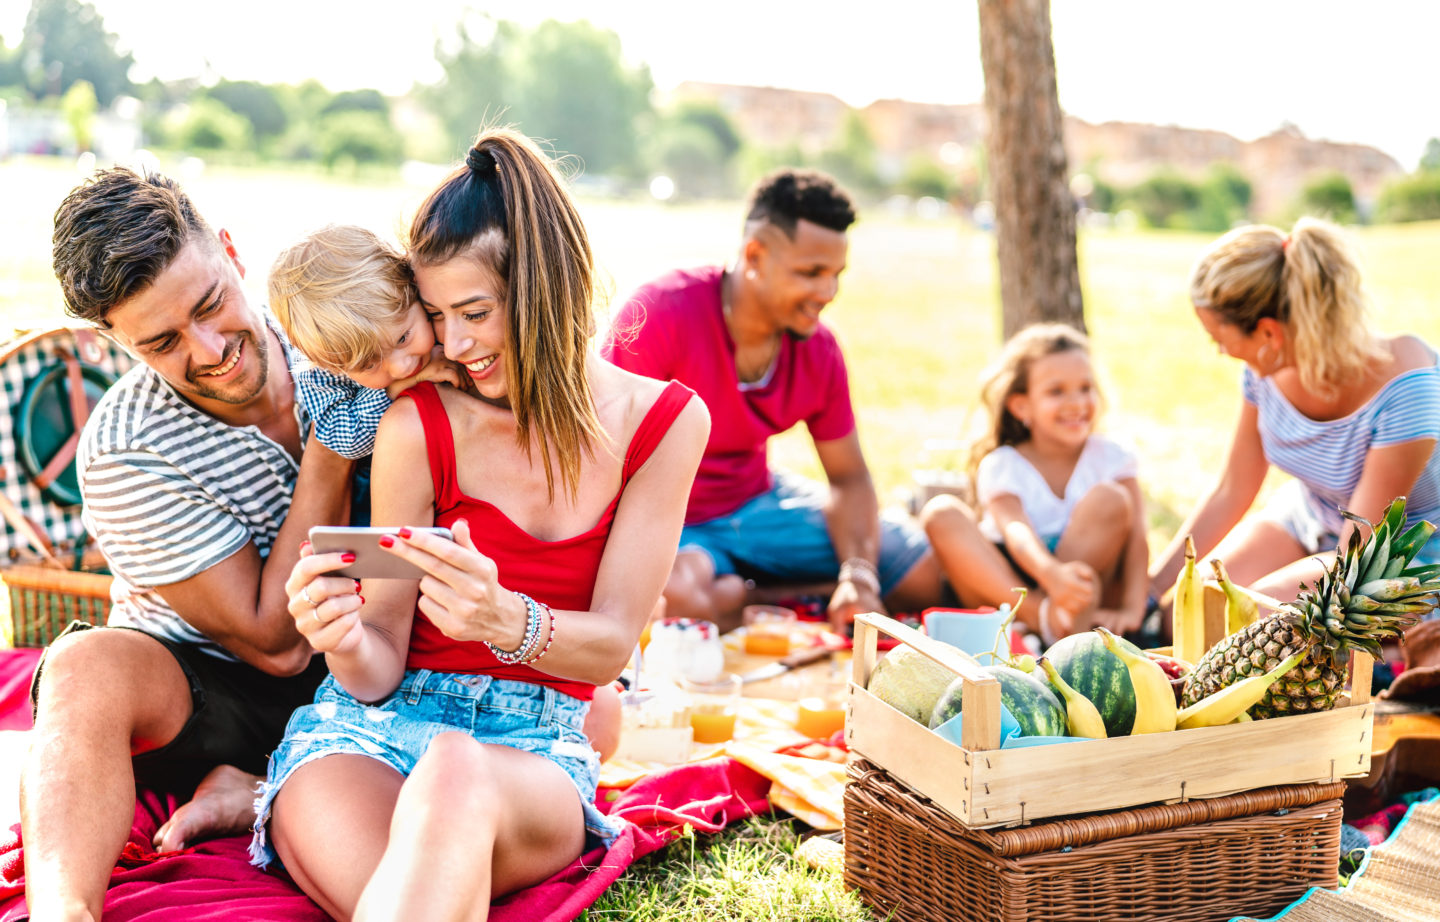 Best Outdoor Family Bonding Activities To Try This Summer: Have A Picnic